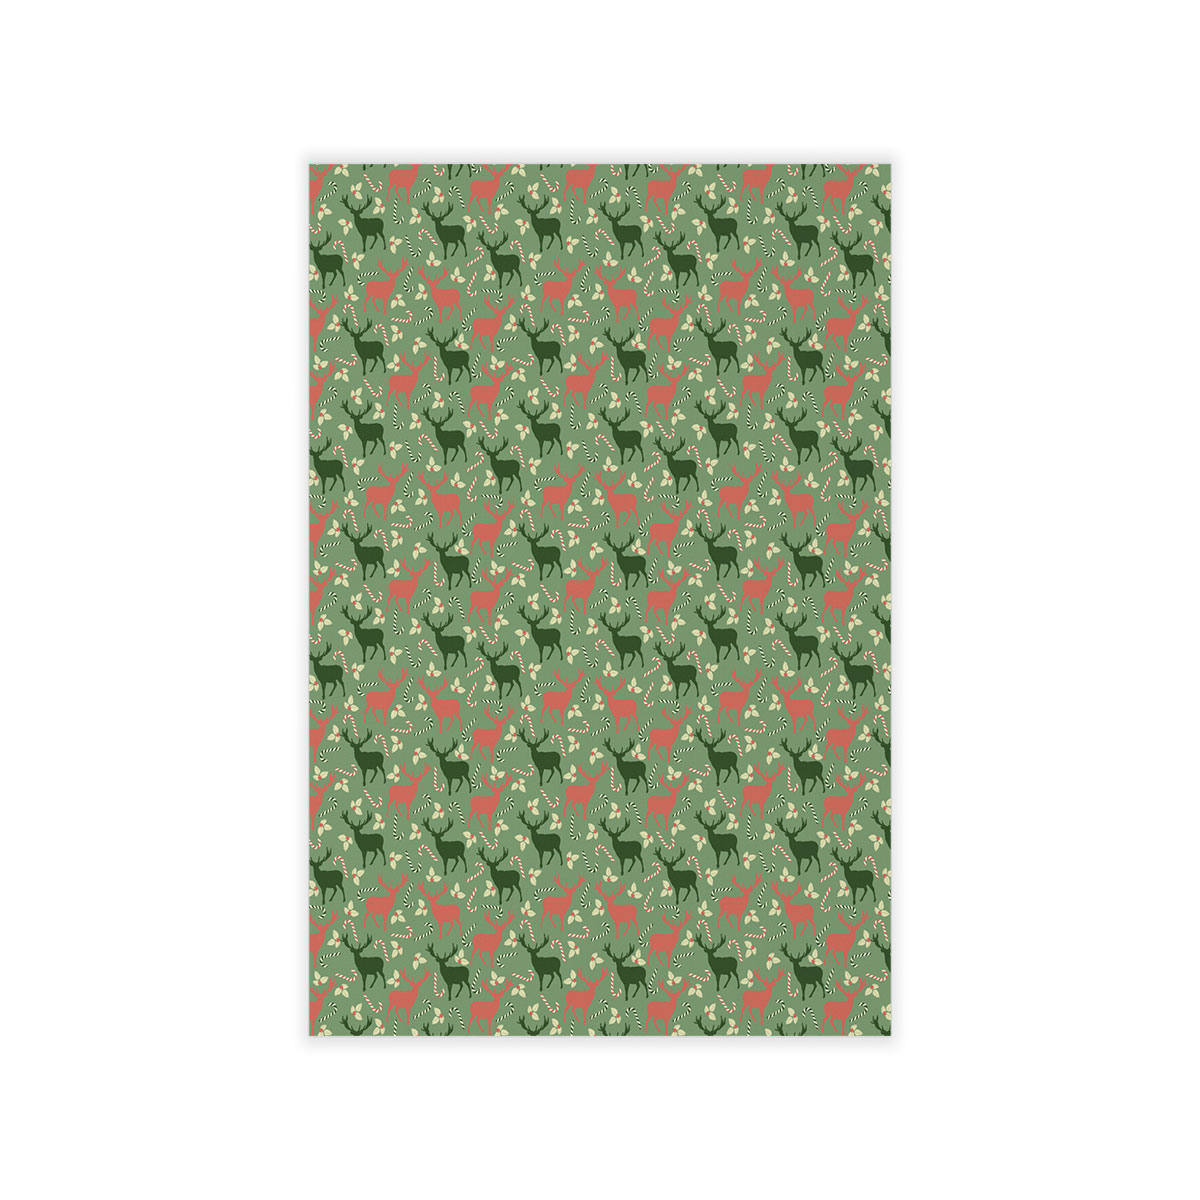 Reindeer, Christmas Flowers And Candy Canes Wall Decals